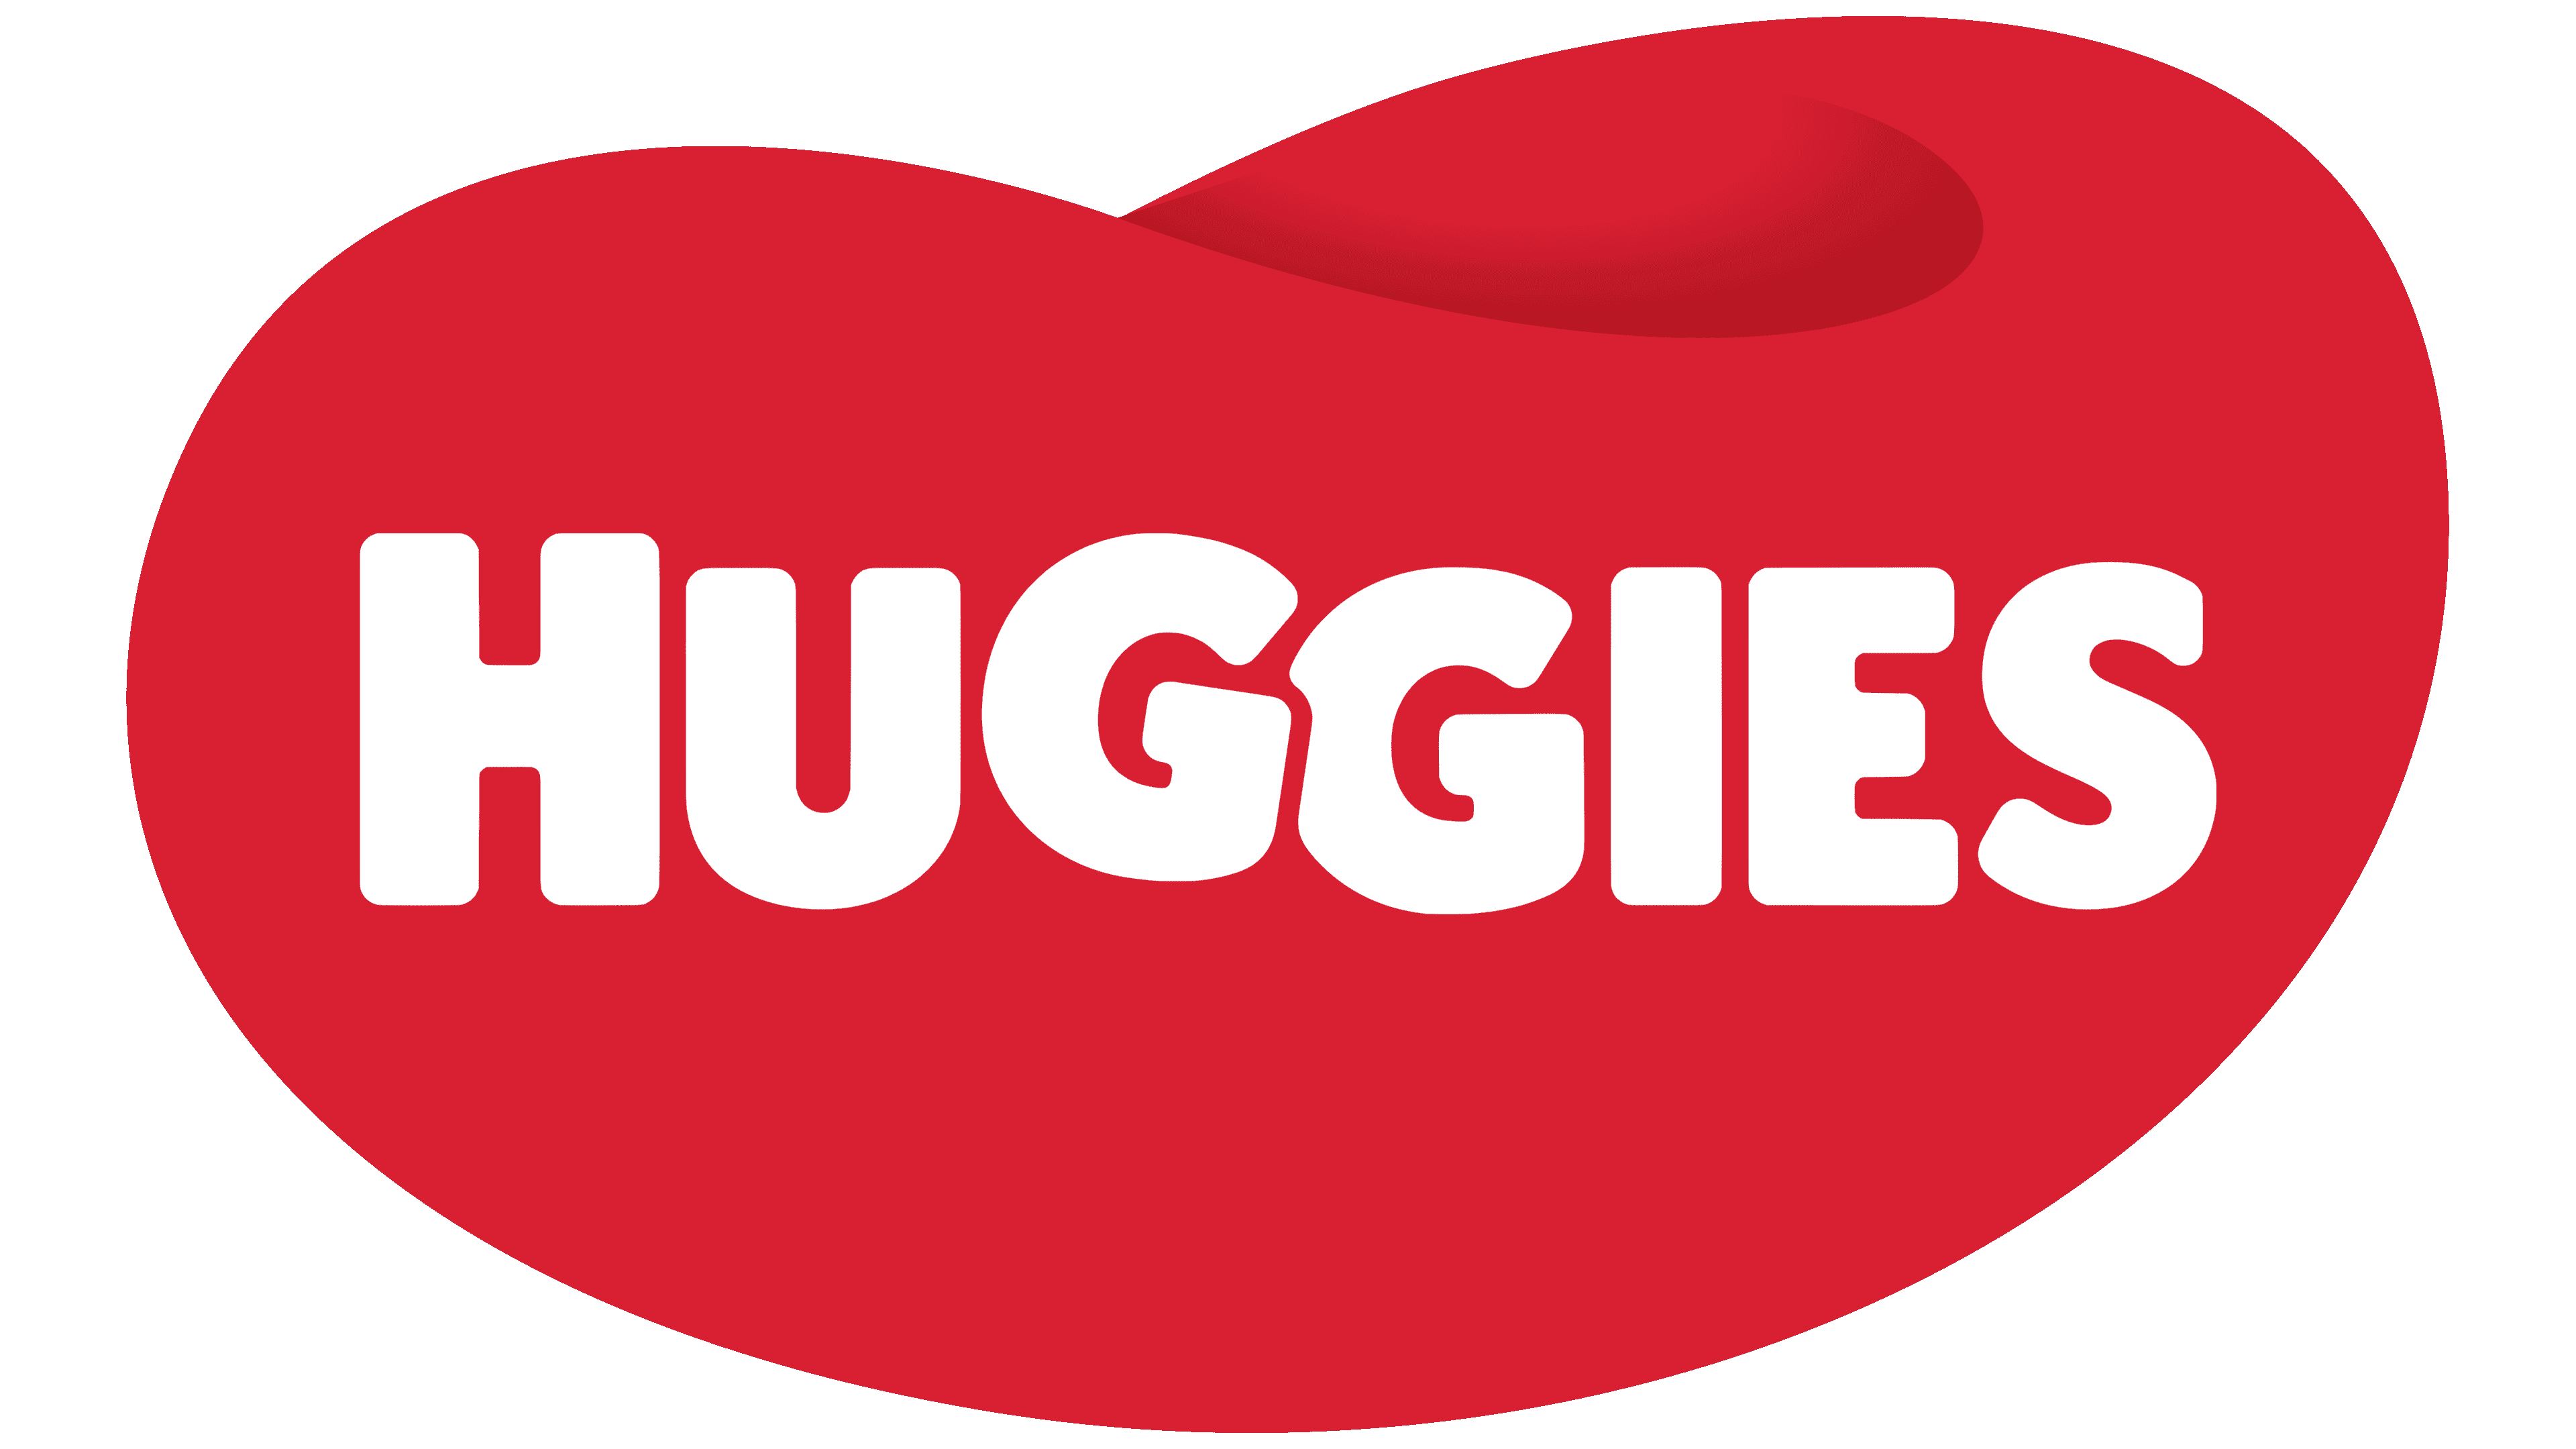 huggies meaning